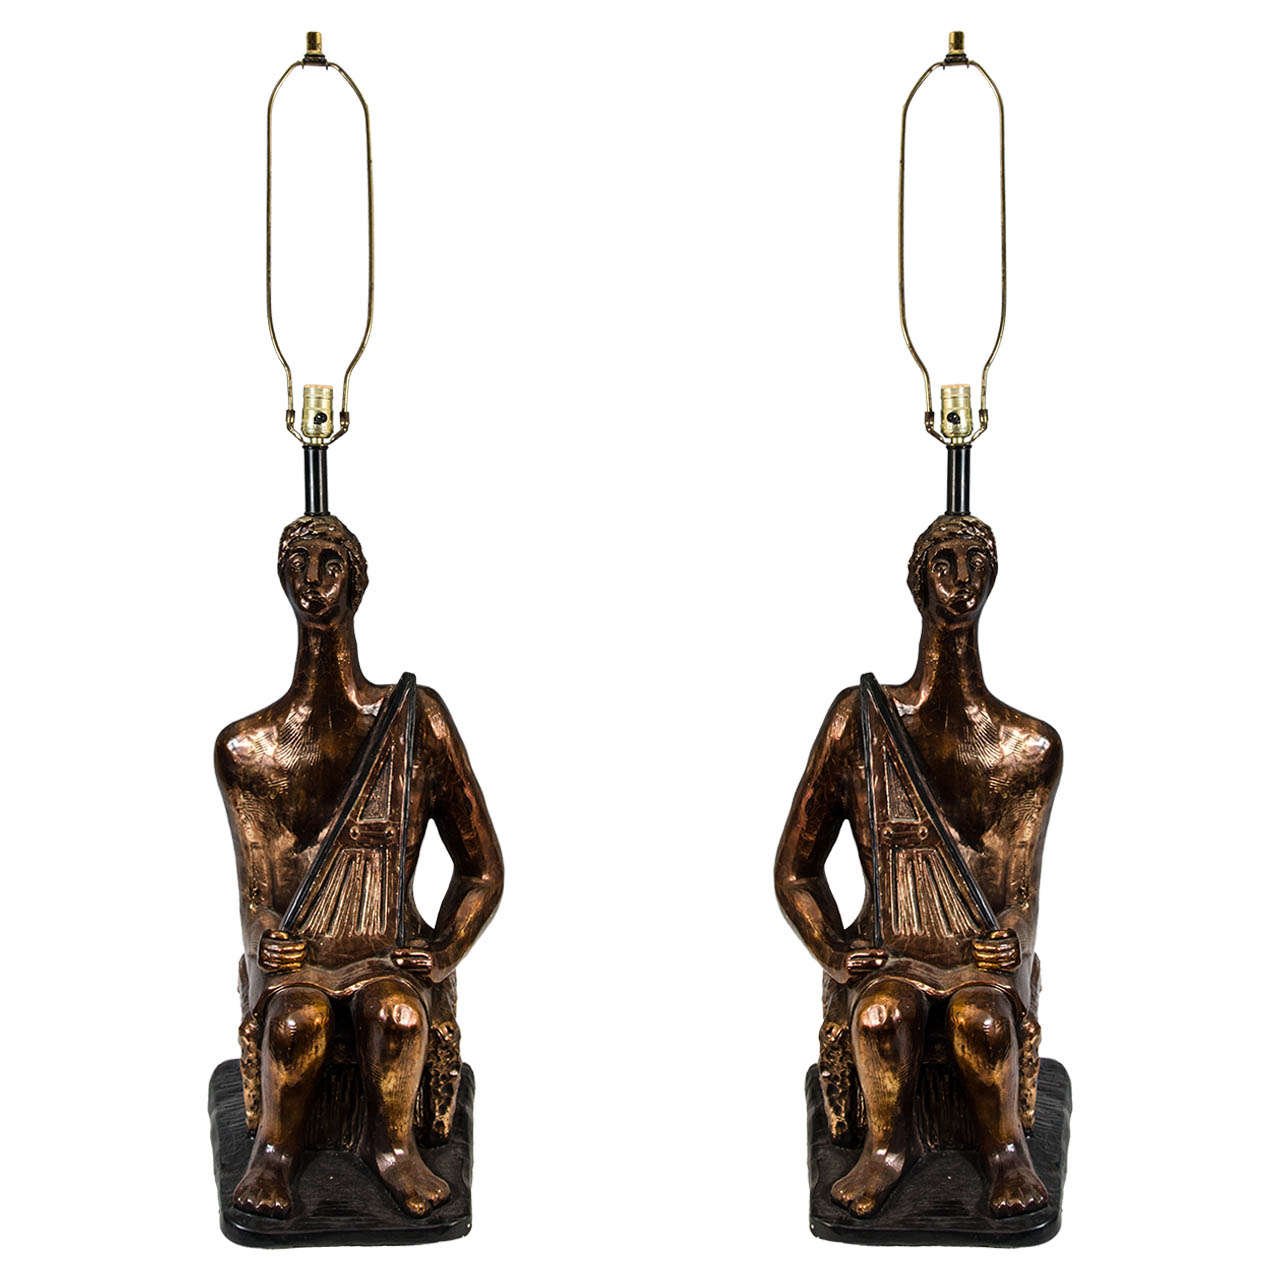 Incredible Massive Pair of Giacometti Style Figural Table Lamps by Pieri Tullio For Sale